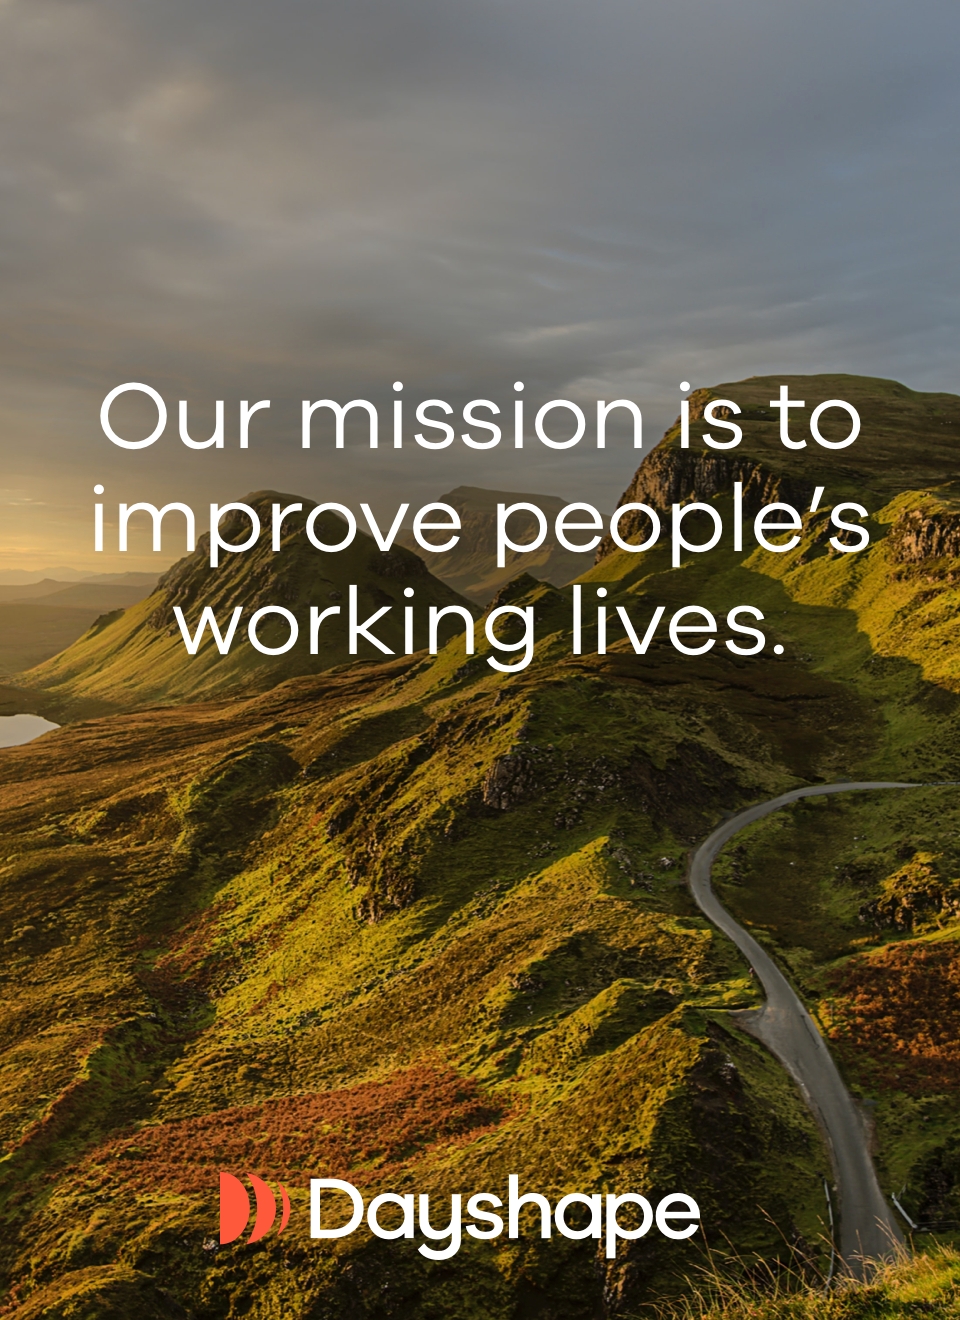 A landscape photo overlaid with text states “Our mission is to improve people's working lives”